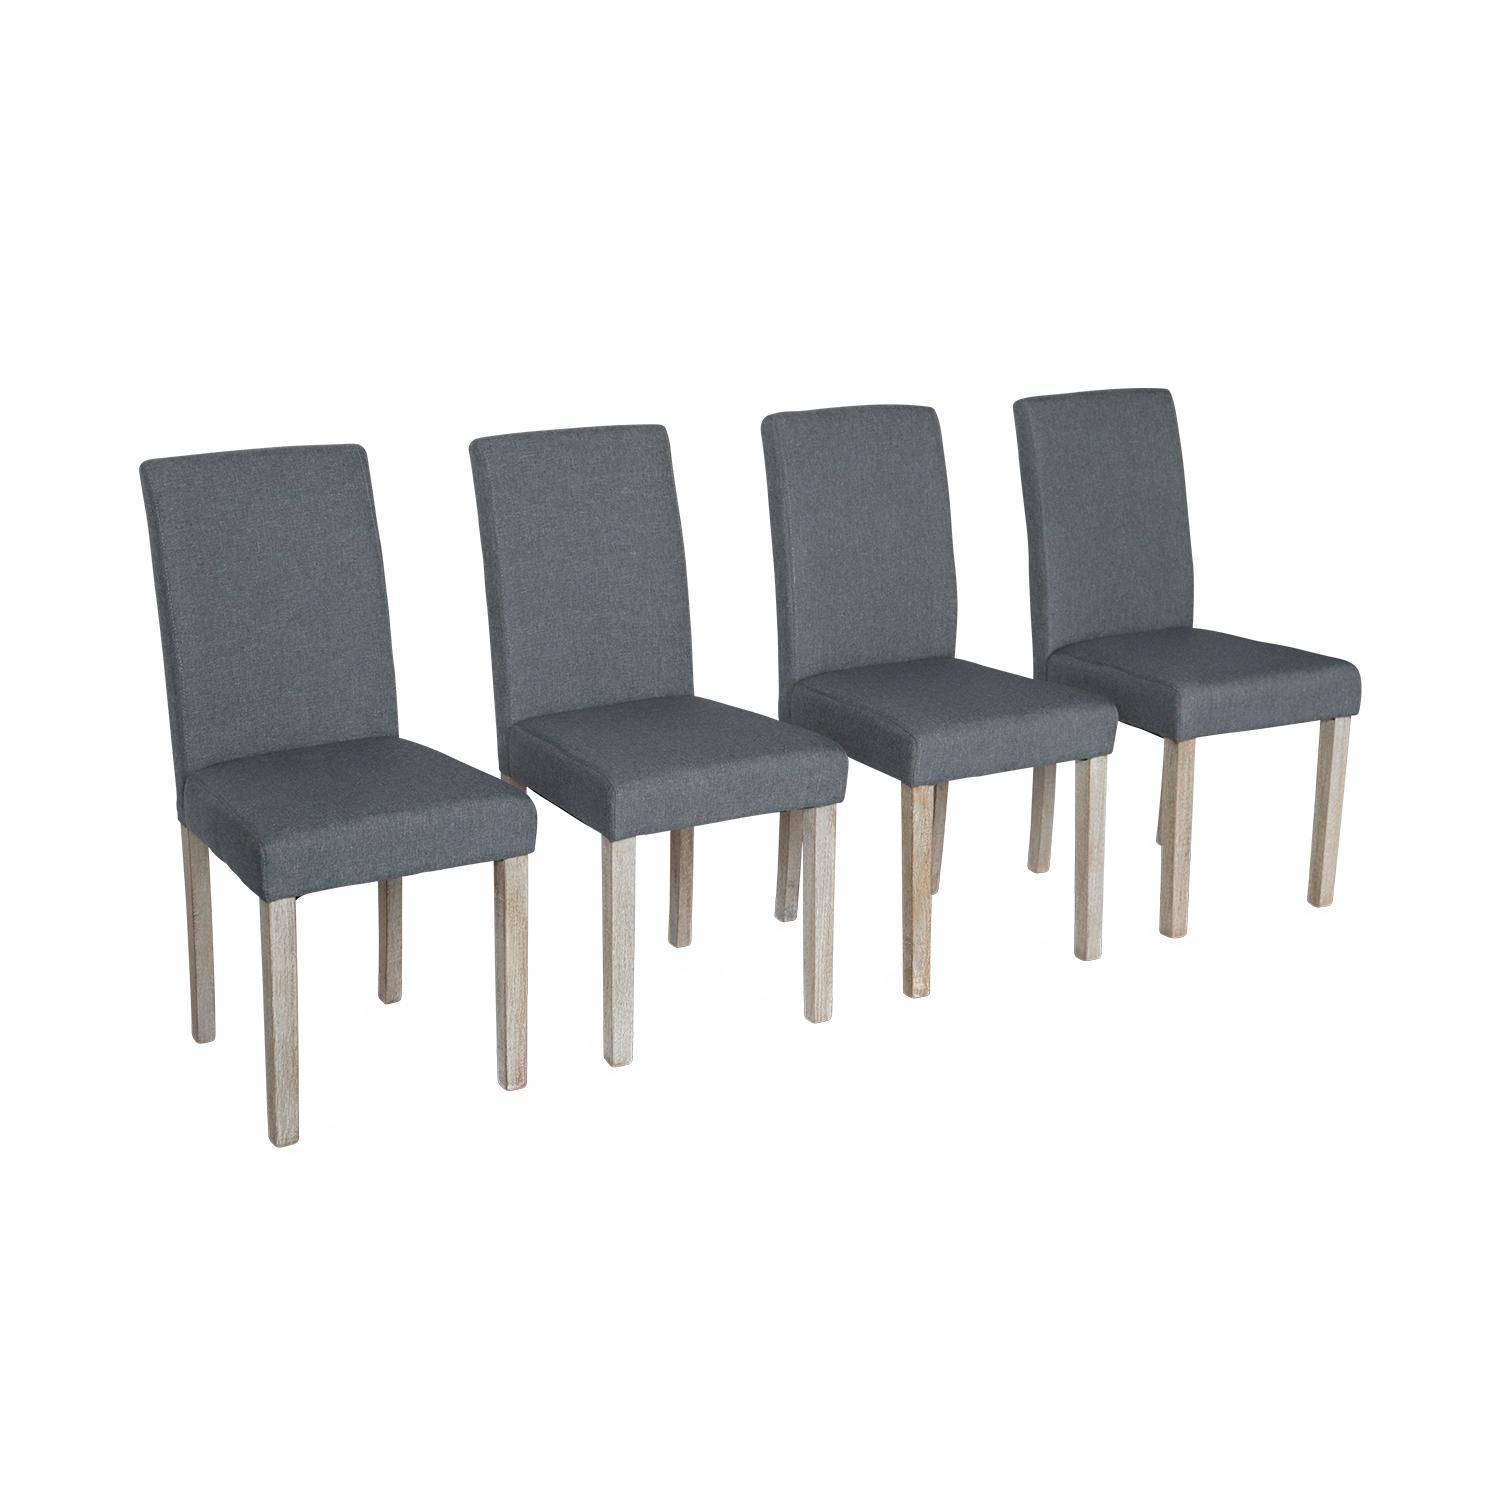 Set of 4 fabric dining chairs with wooden legs - Rita - Charcoal grey Photo3